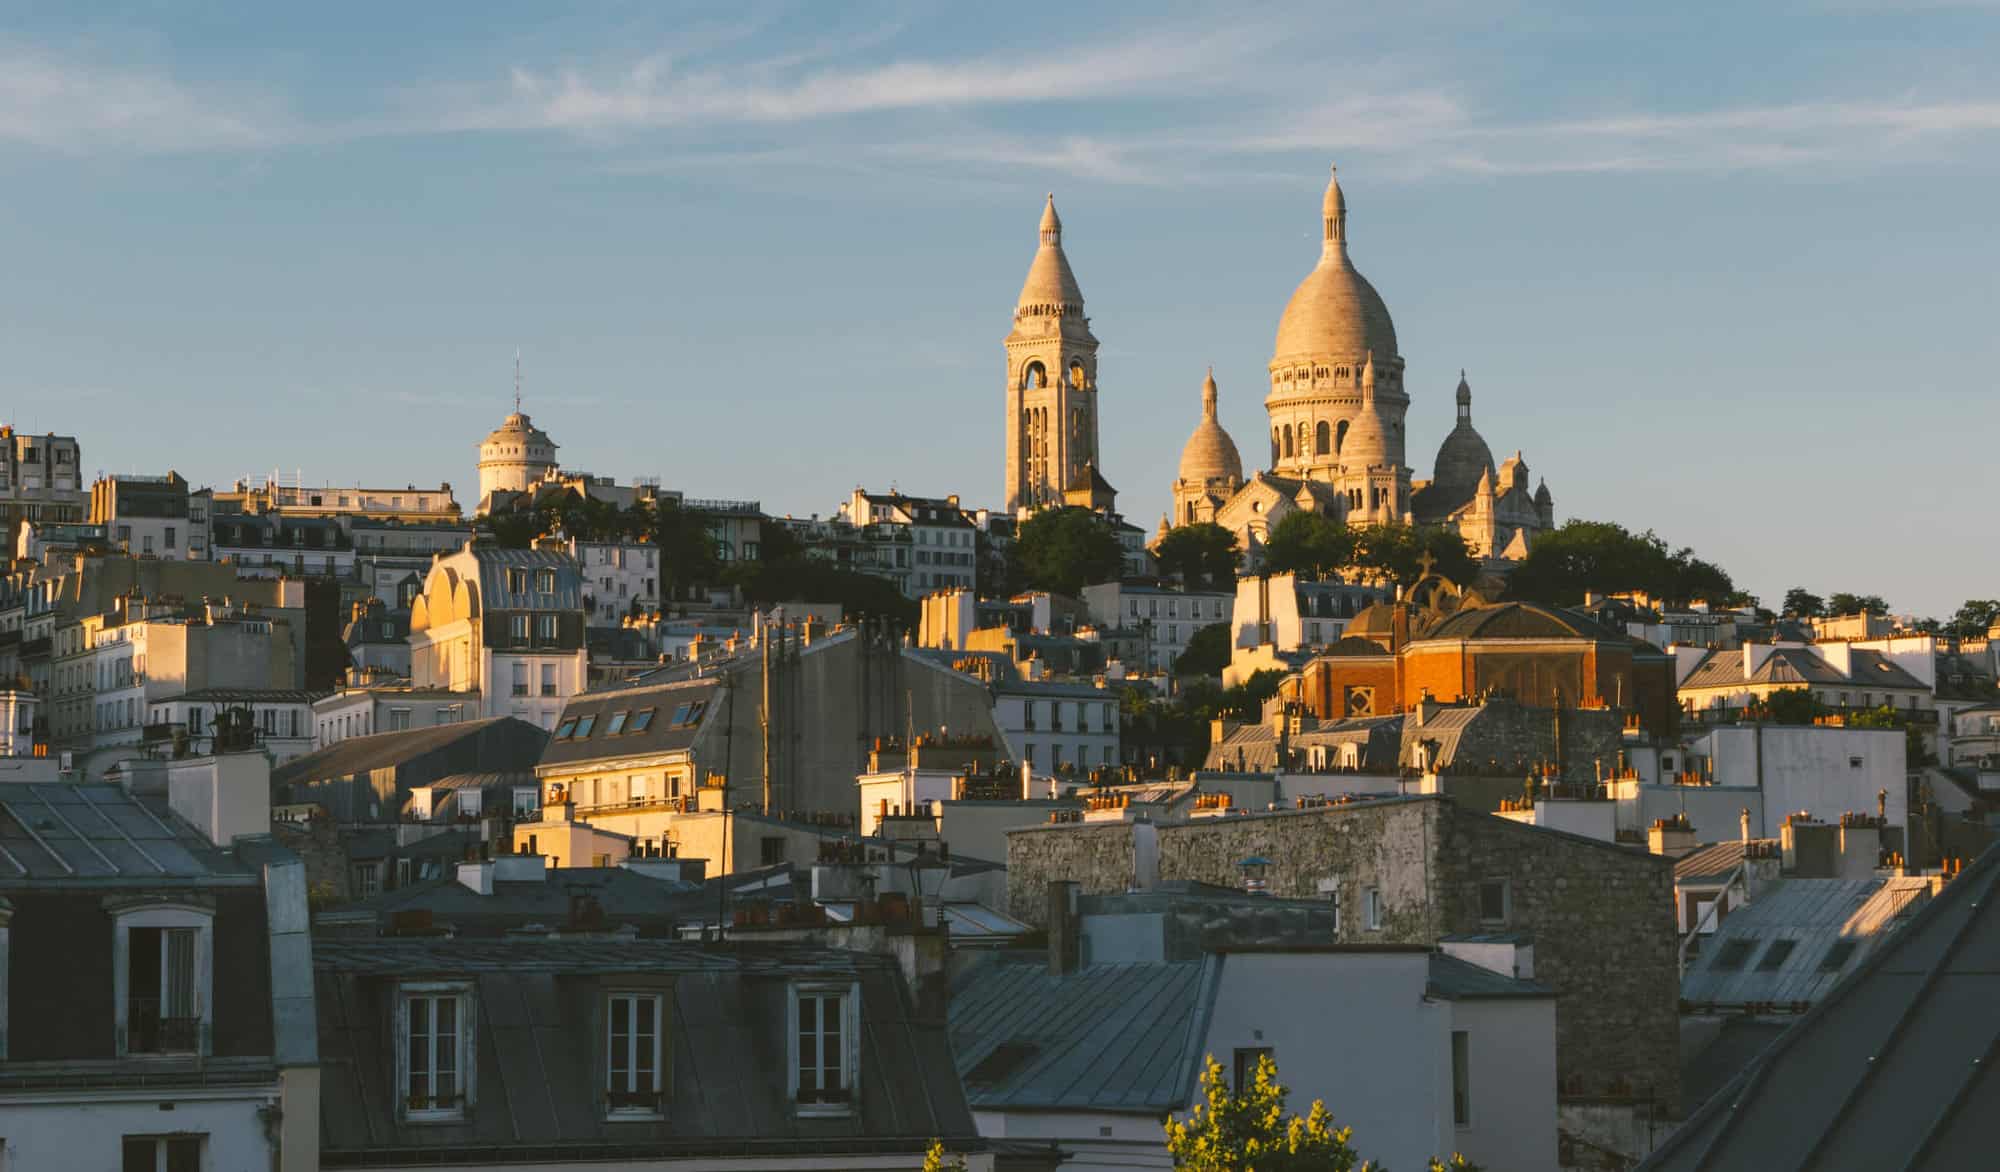 A shot at golden hour of Montmartre rooftops with a view of Sacre Coeur lit by the setting sun.